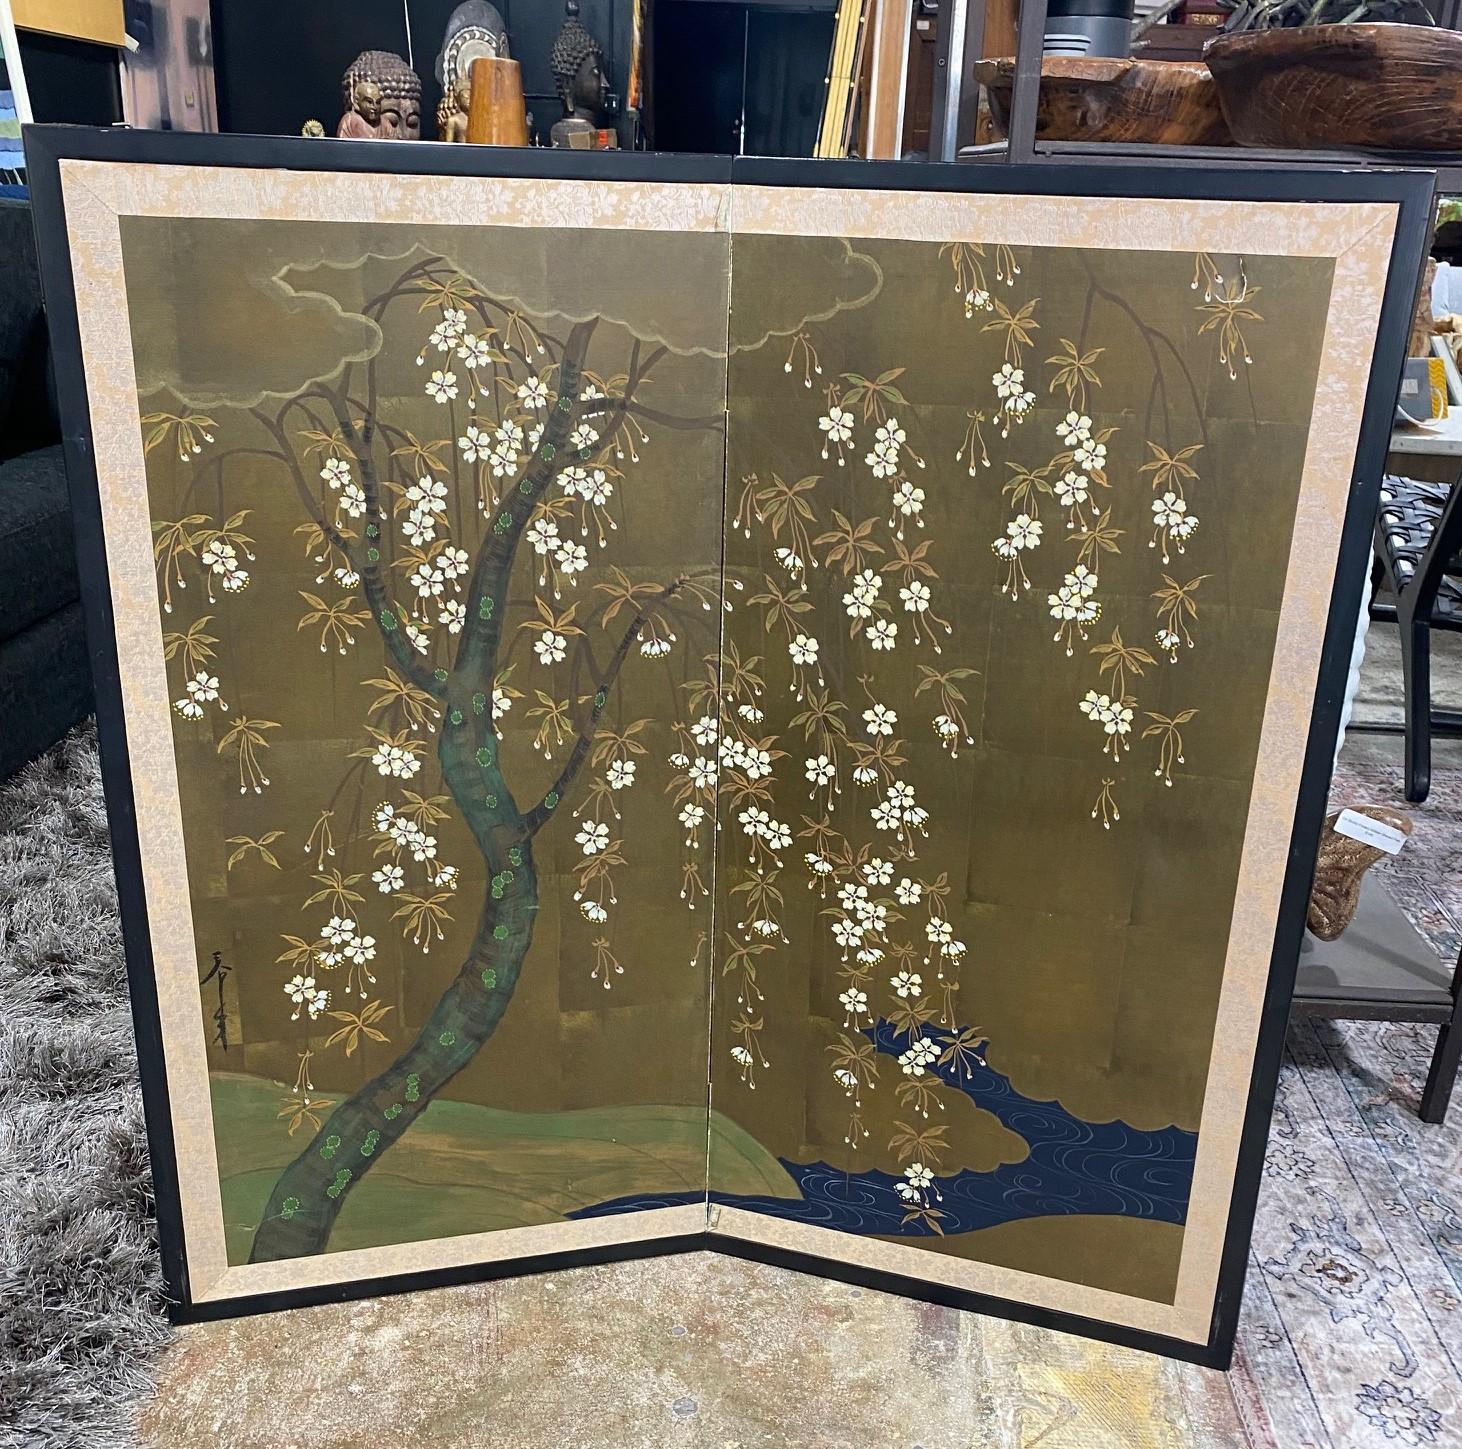 A gorgeous two-panel Japanese Byobu folding screen depicting a nature landscape scene with a blossoming flower tree and a running stream below. The bright, rich colors, gold leaf, and beautiful hand-painted detail of the tree's trunk, branches and